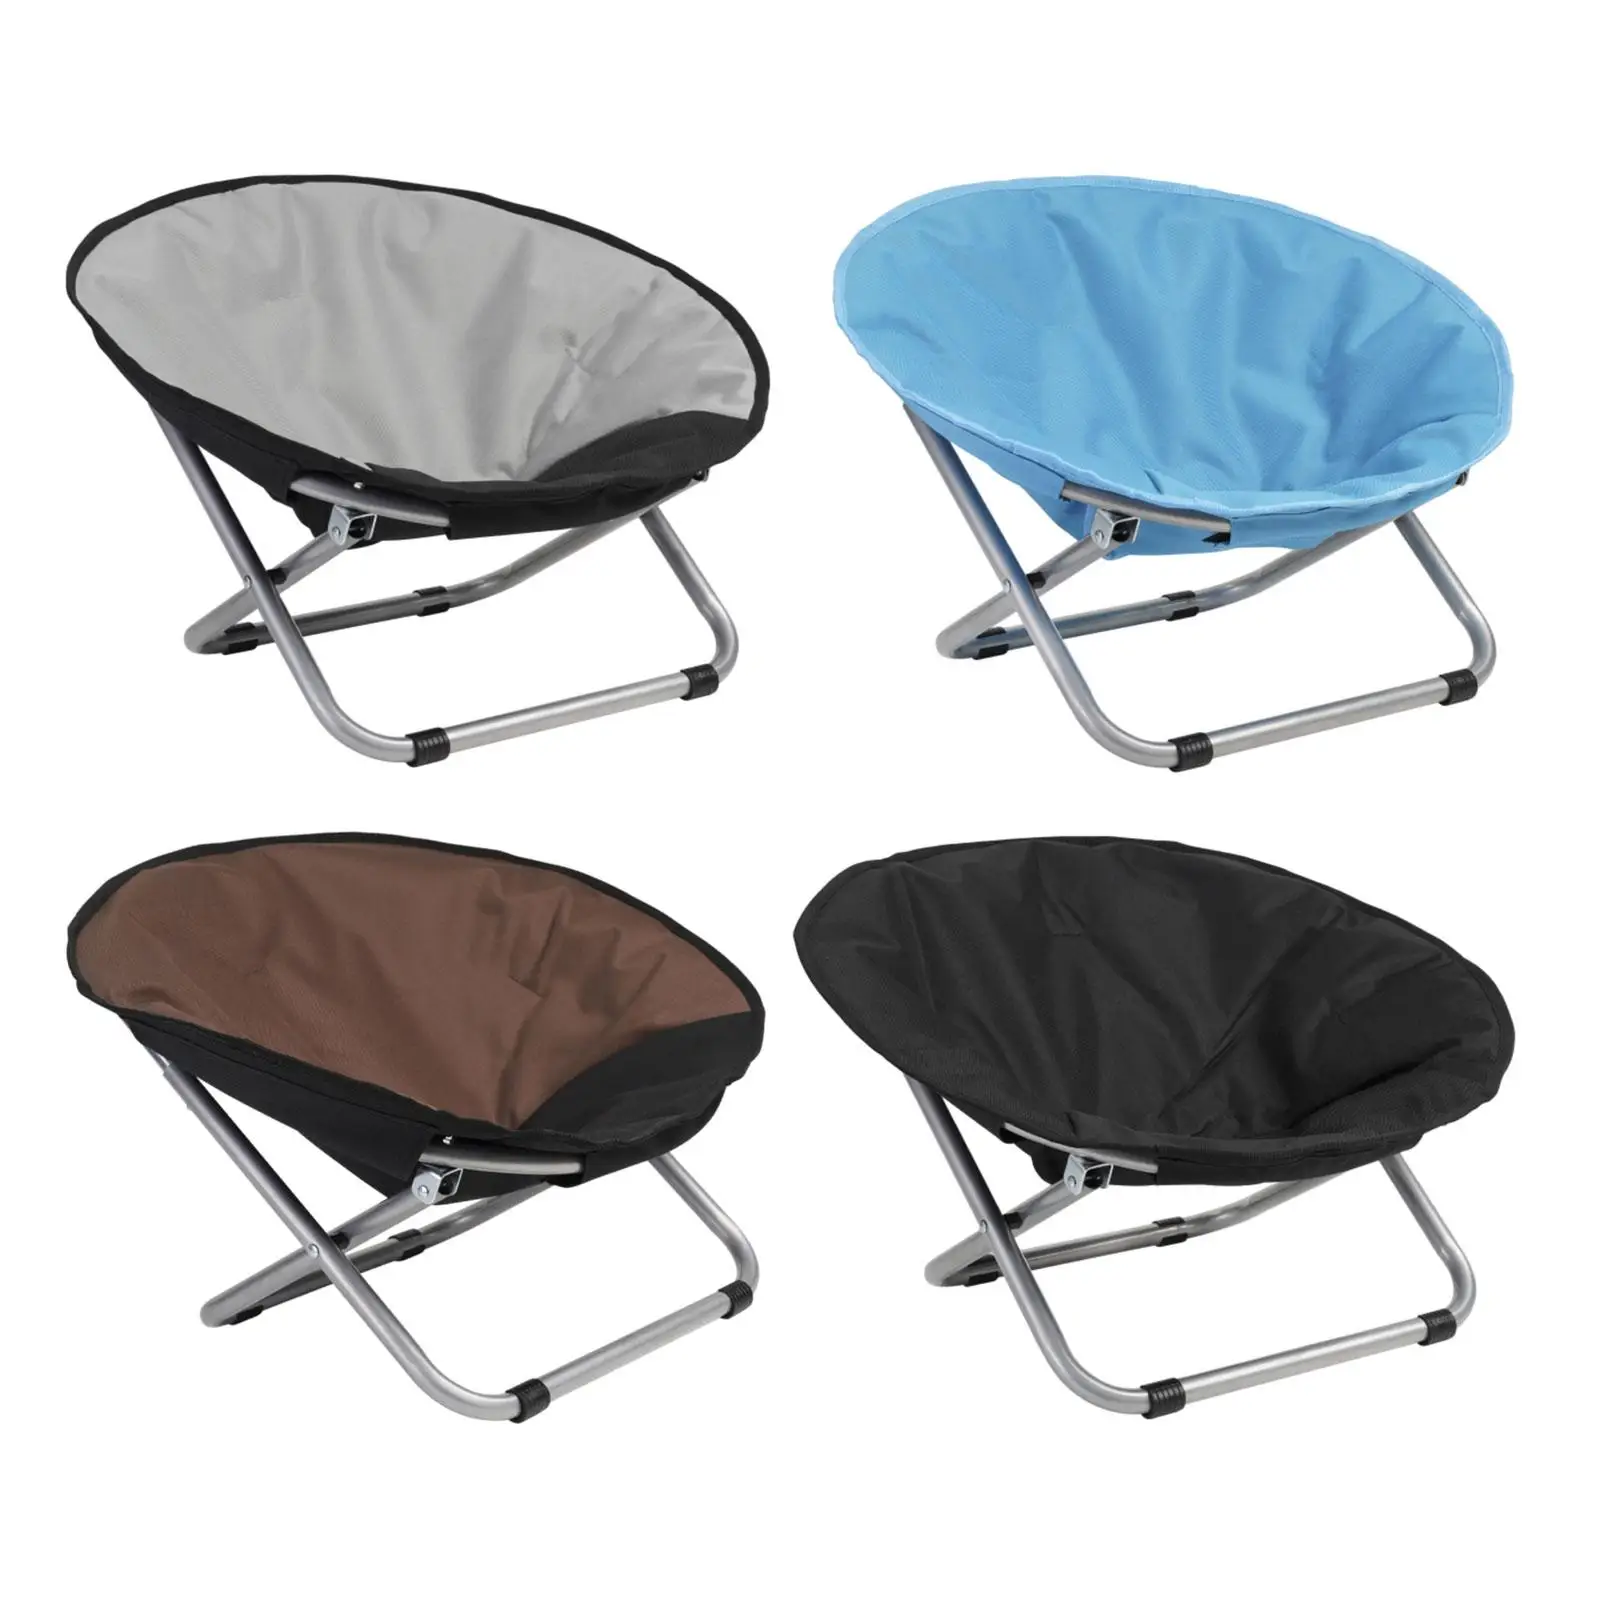 Elevated Bed Foldable Rest Steel Stand Sofa Nest Durable Waterproof Detachable